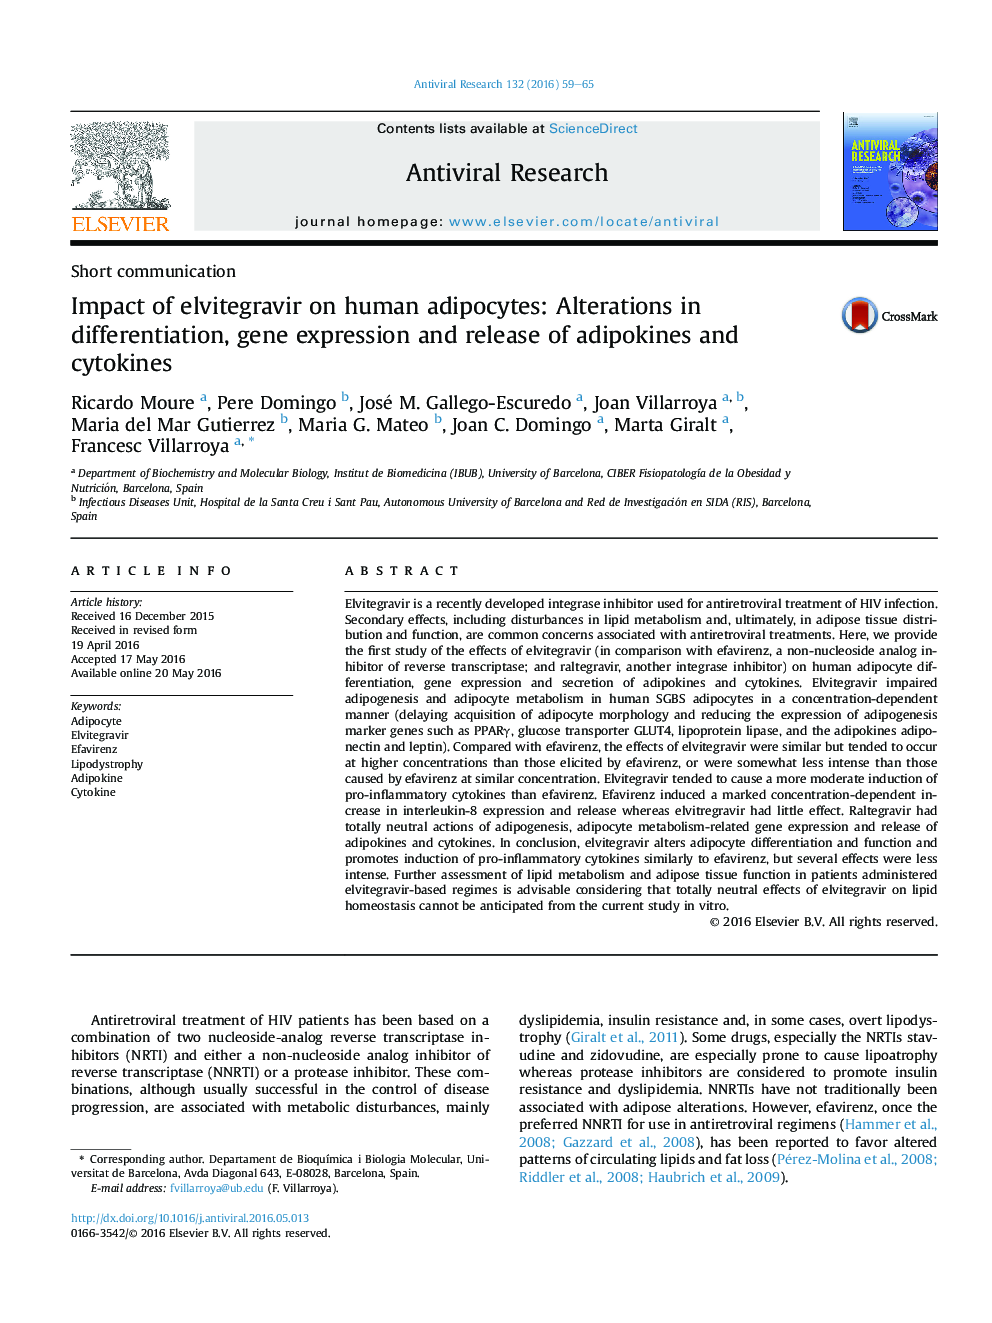 Short communicationImpact of elvitegravir on human adipocytes: Alterations in differentiation, gene expression and release of adipokines and cytokines